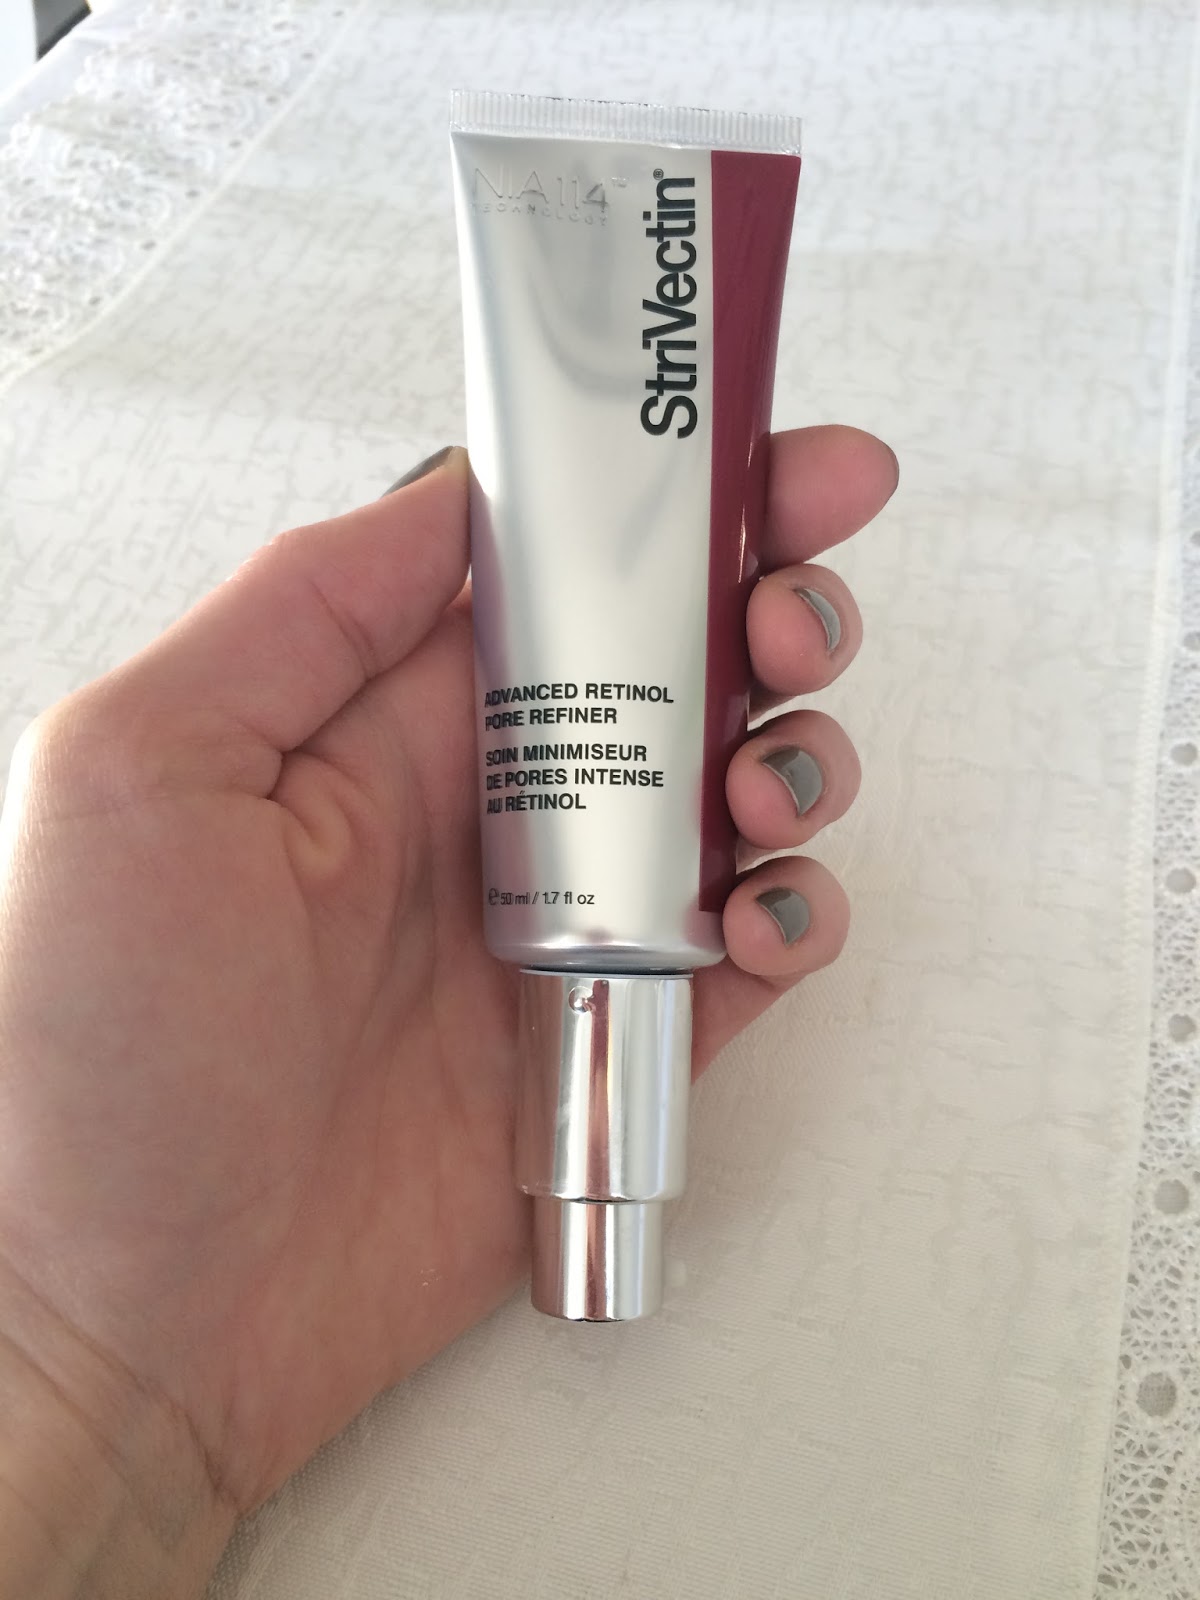 My Favorite Pore Refiner- StriVectin | all dressed up with nothing to drink...